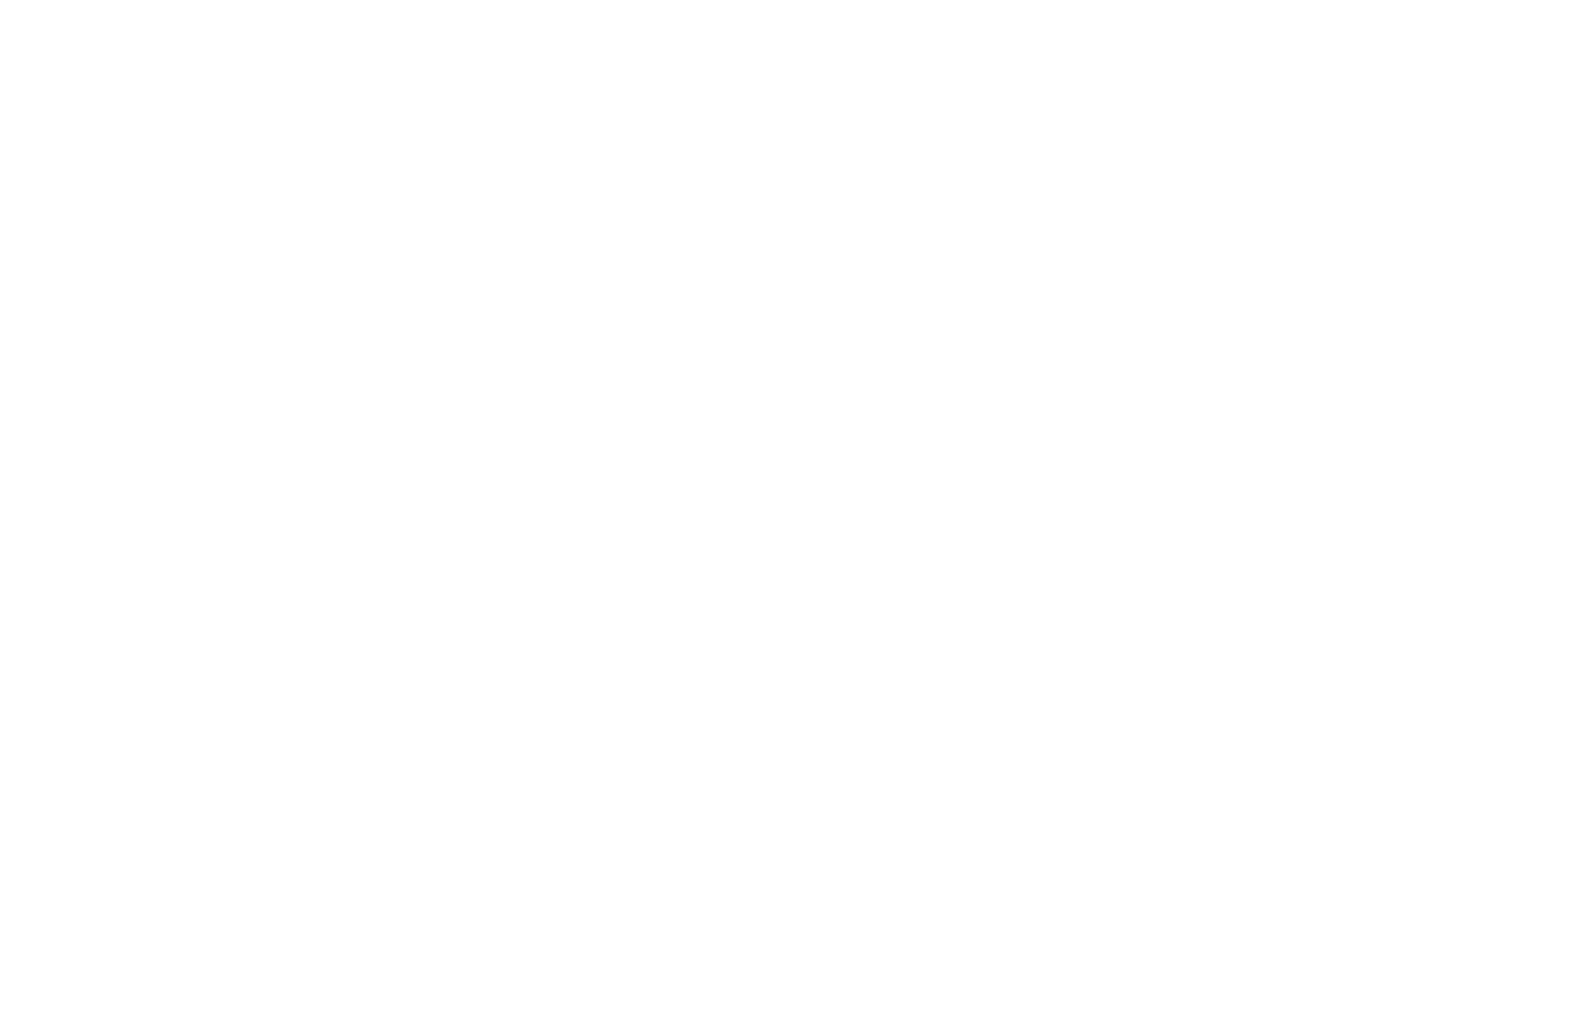 Code for Causes logo